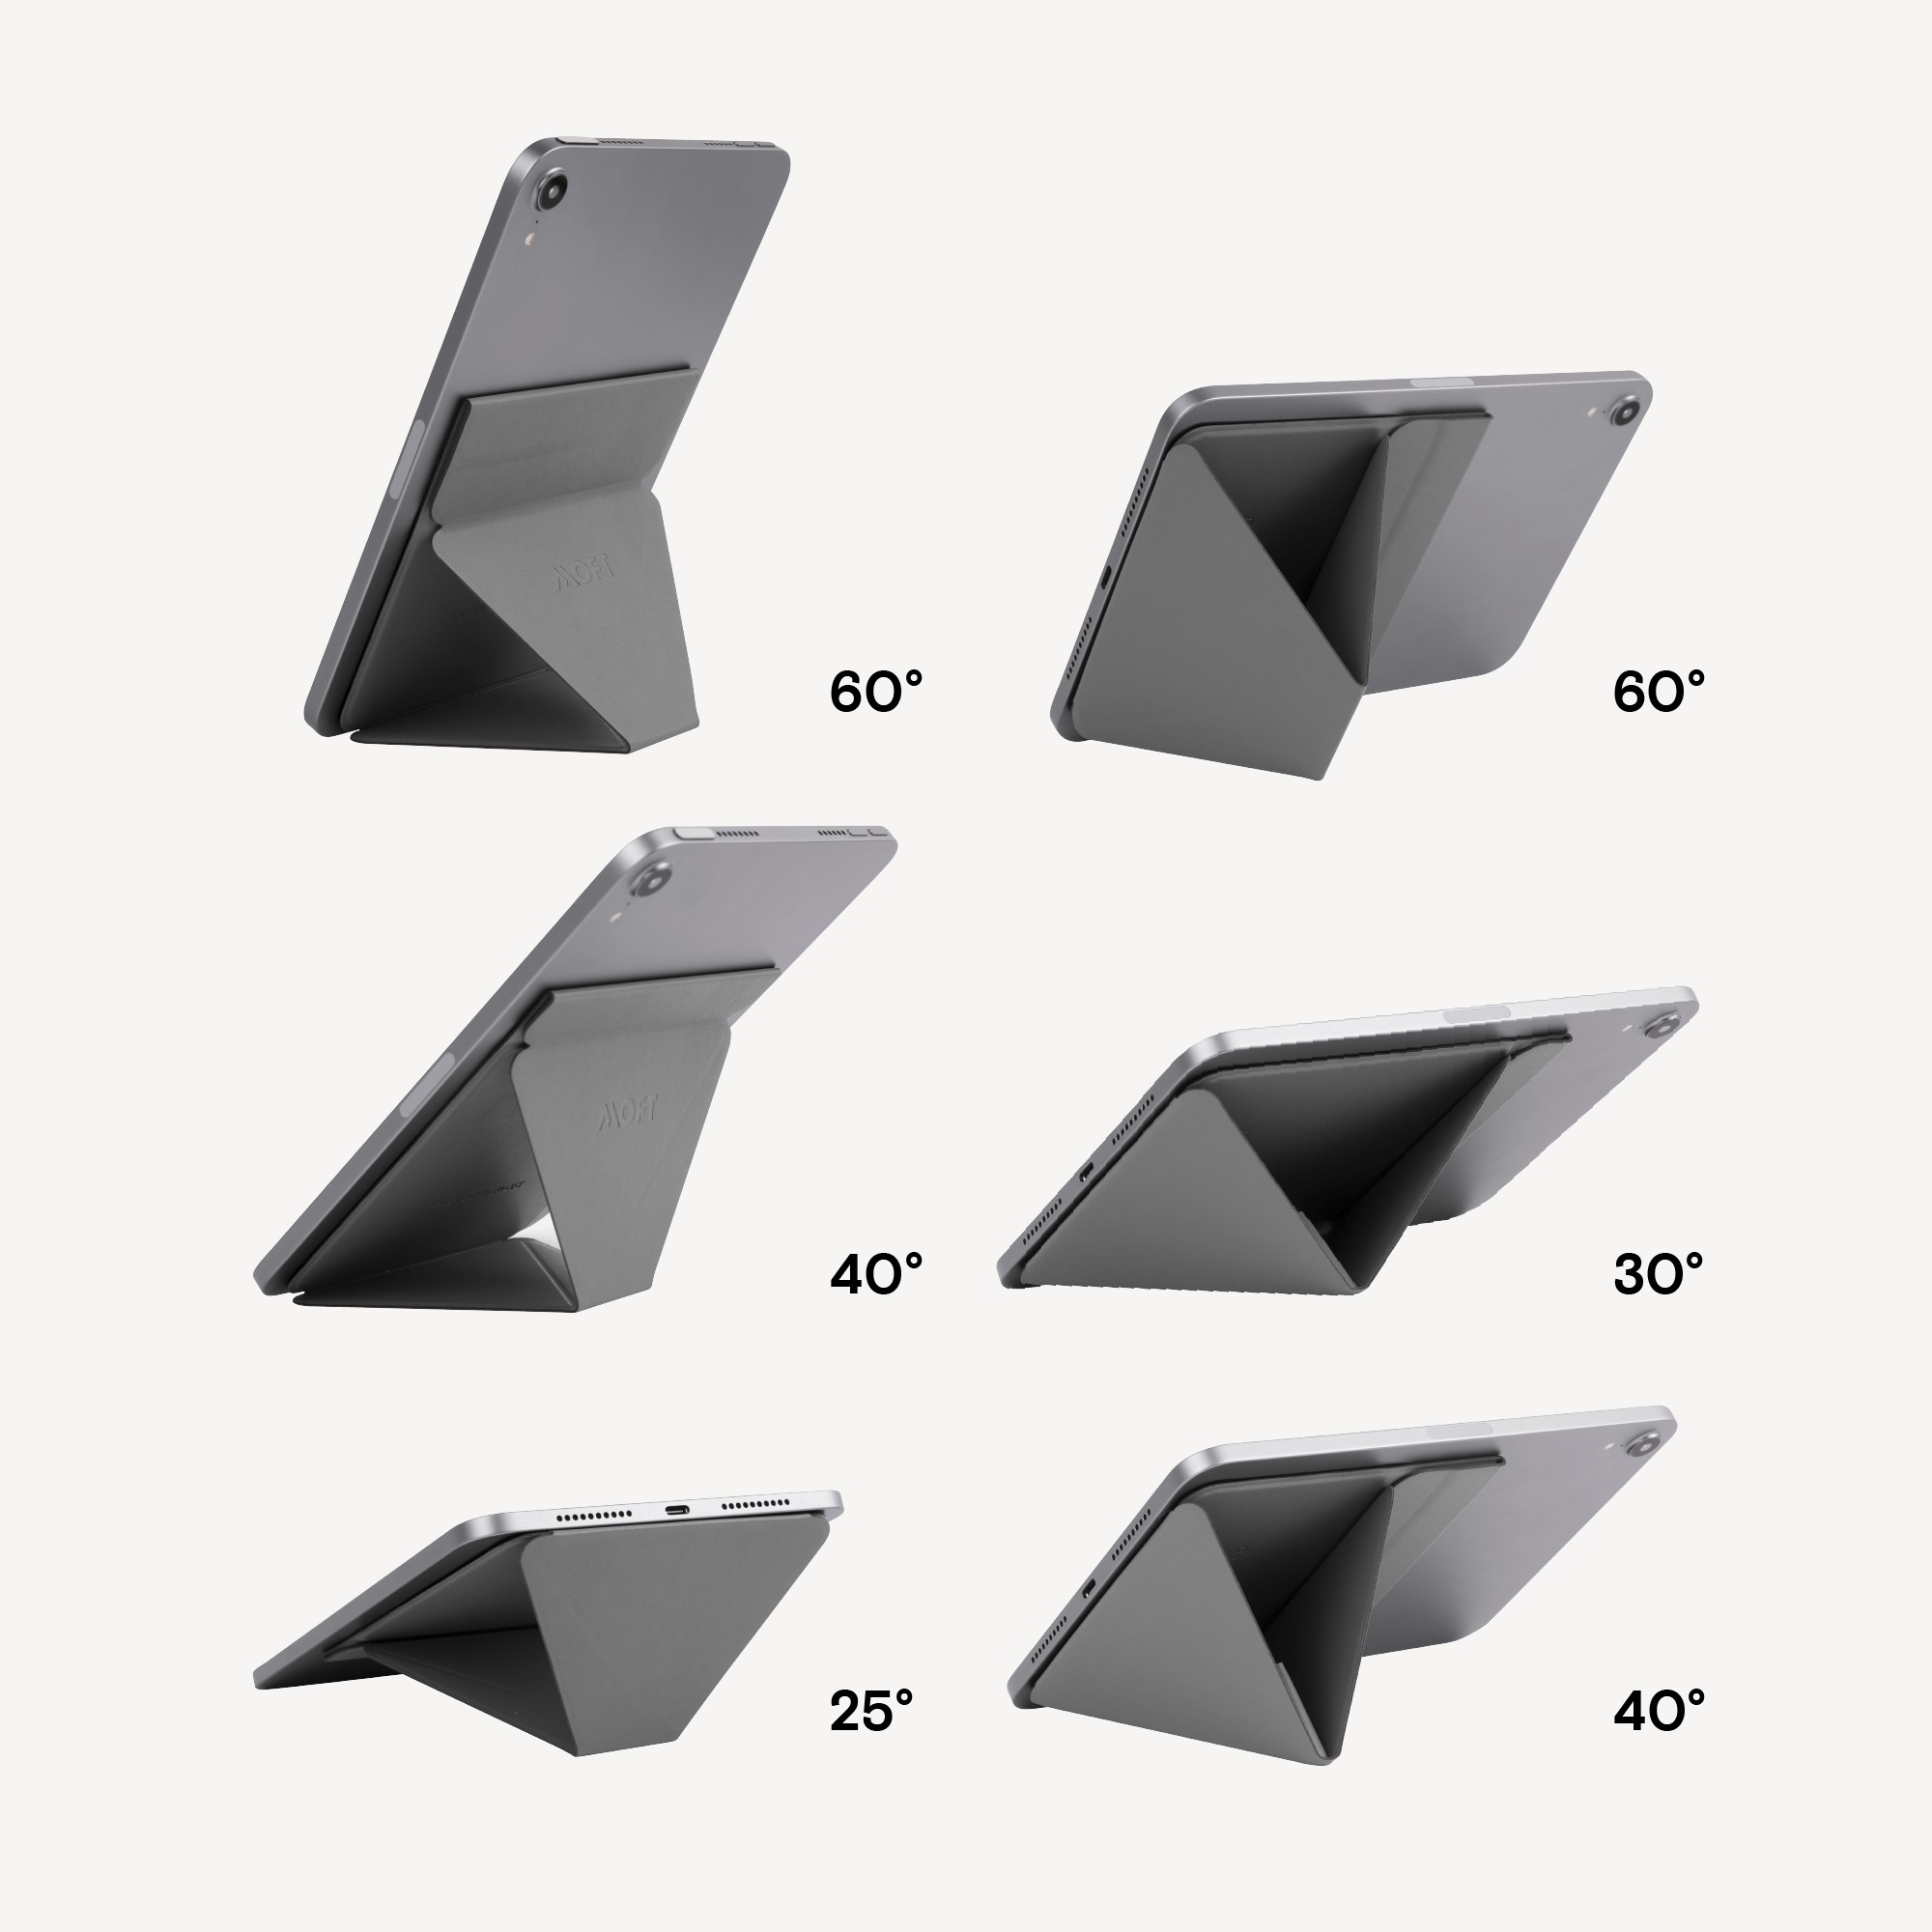 MOFT Adhesive Wall Stand & Snap Pad: Universal Wall Holder for All iPads,  Tablets, Phones and eReaders, Residure-Free